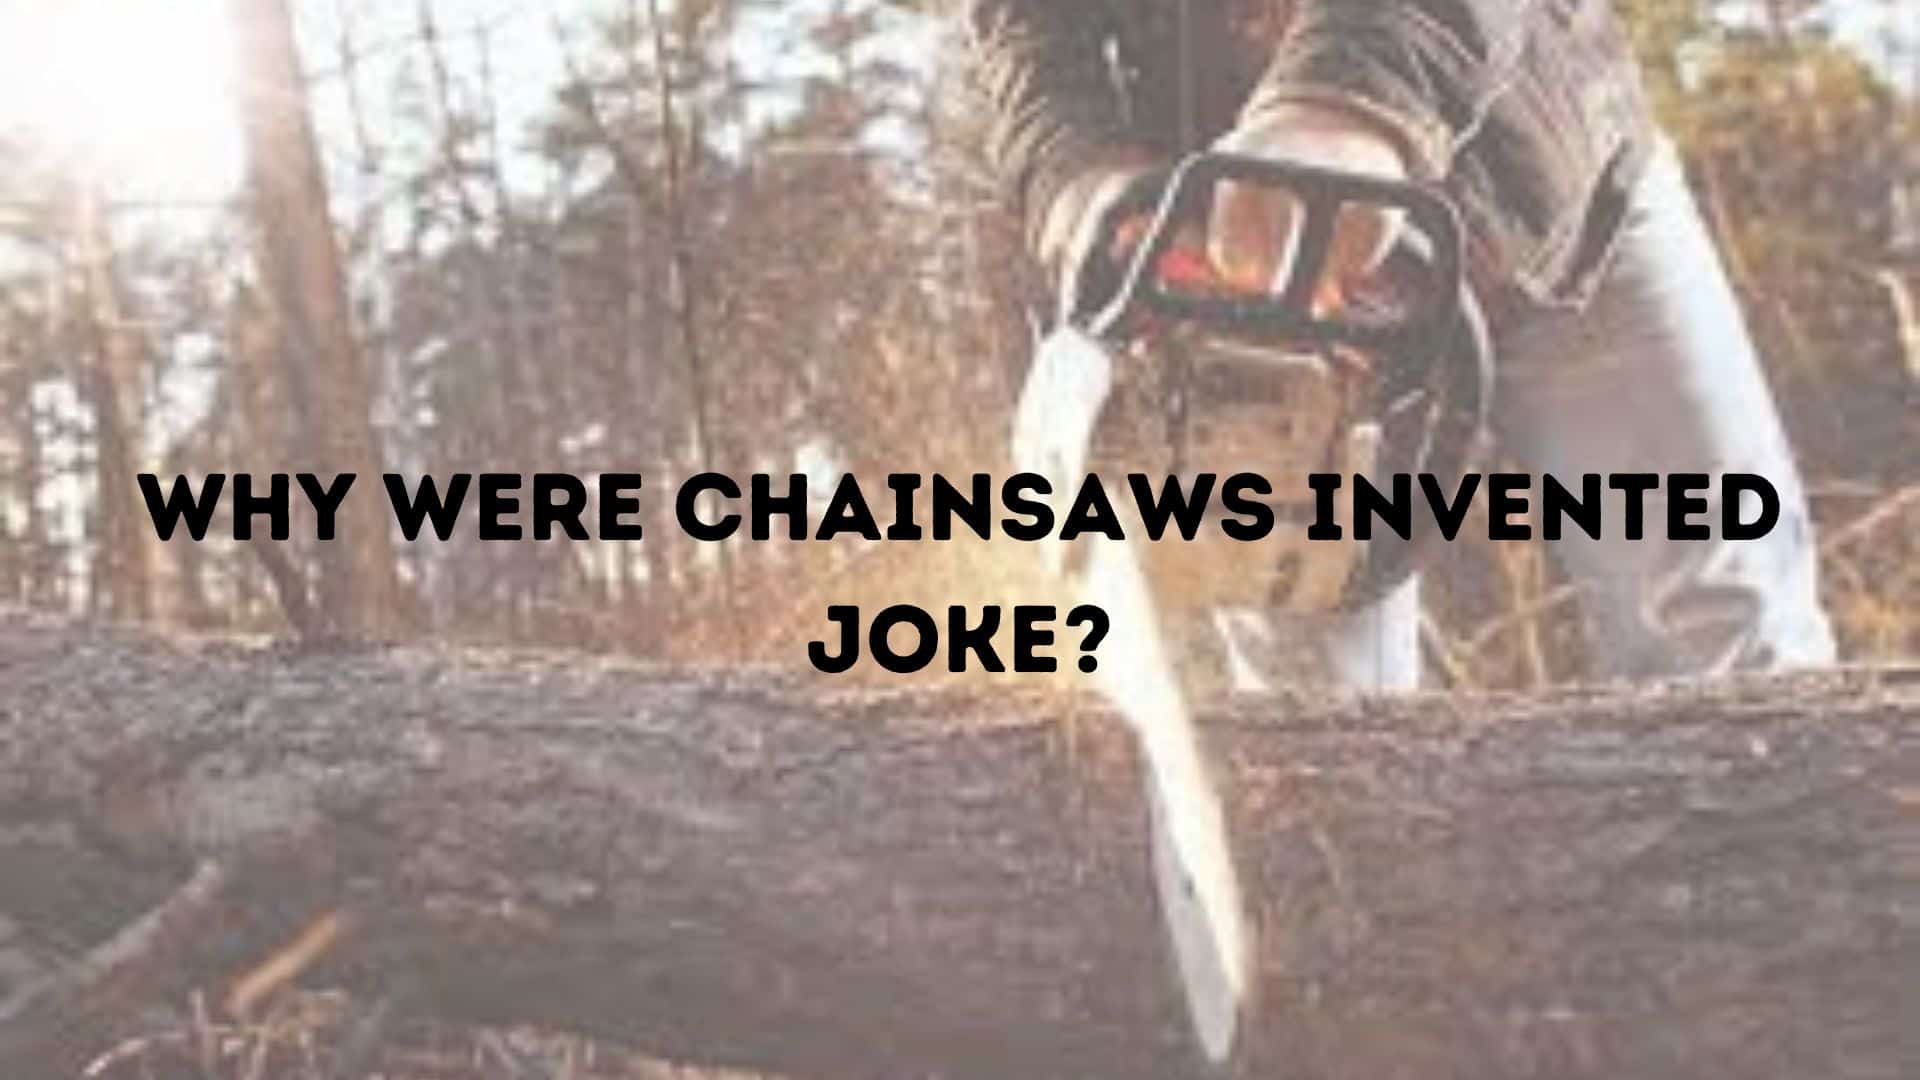 Why Were Chainsaws Invented Joke